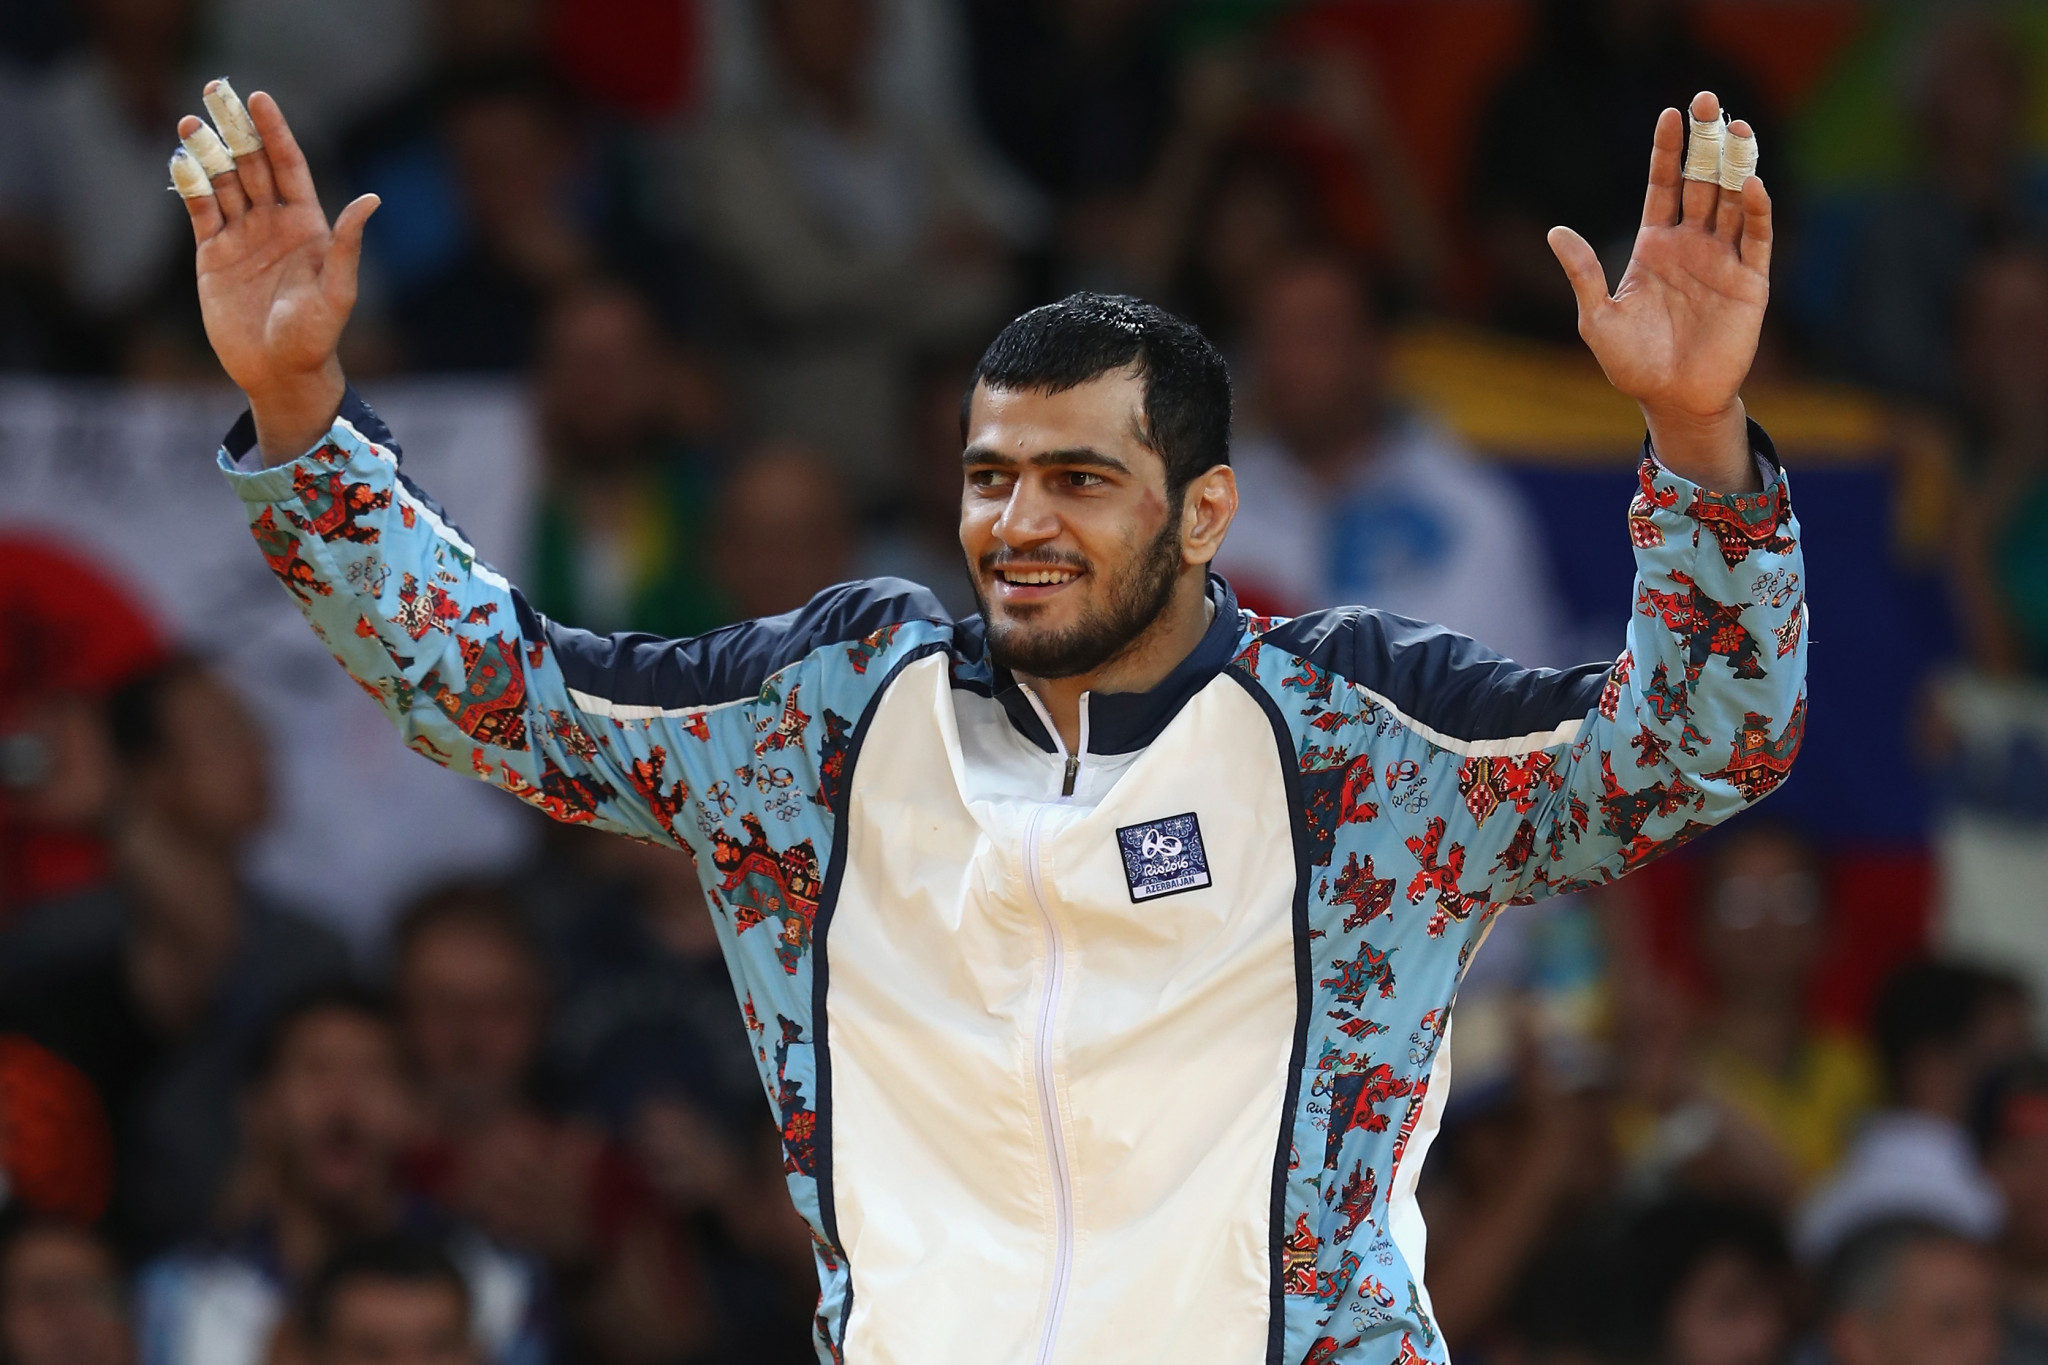 Elmar Gasimov will also be competing in the Croatian capital ©Getty Images